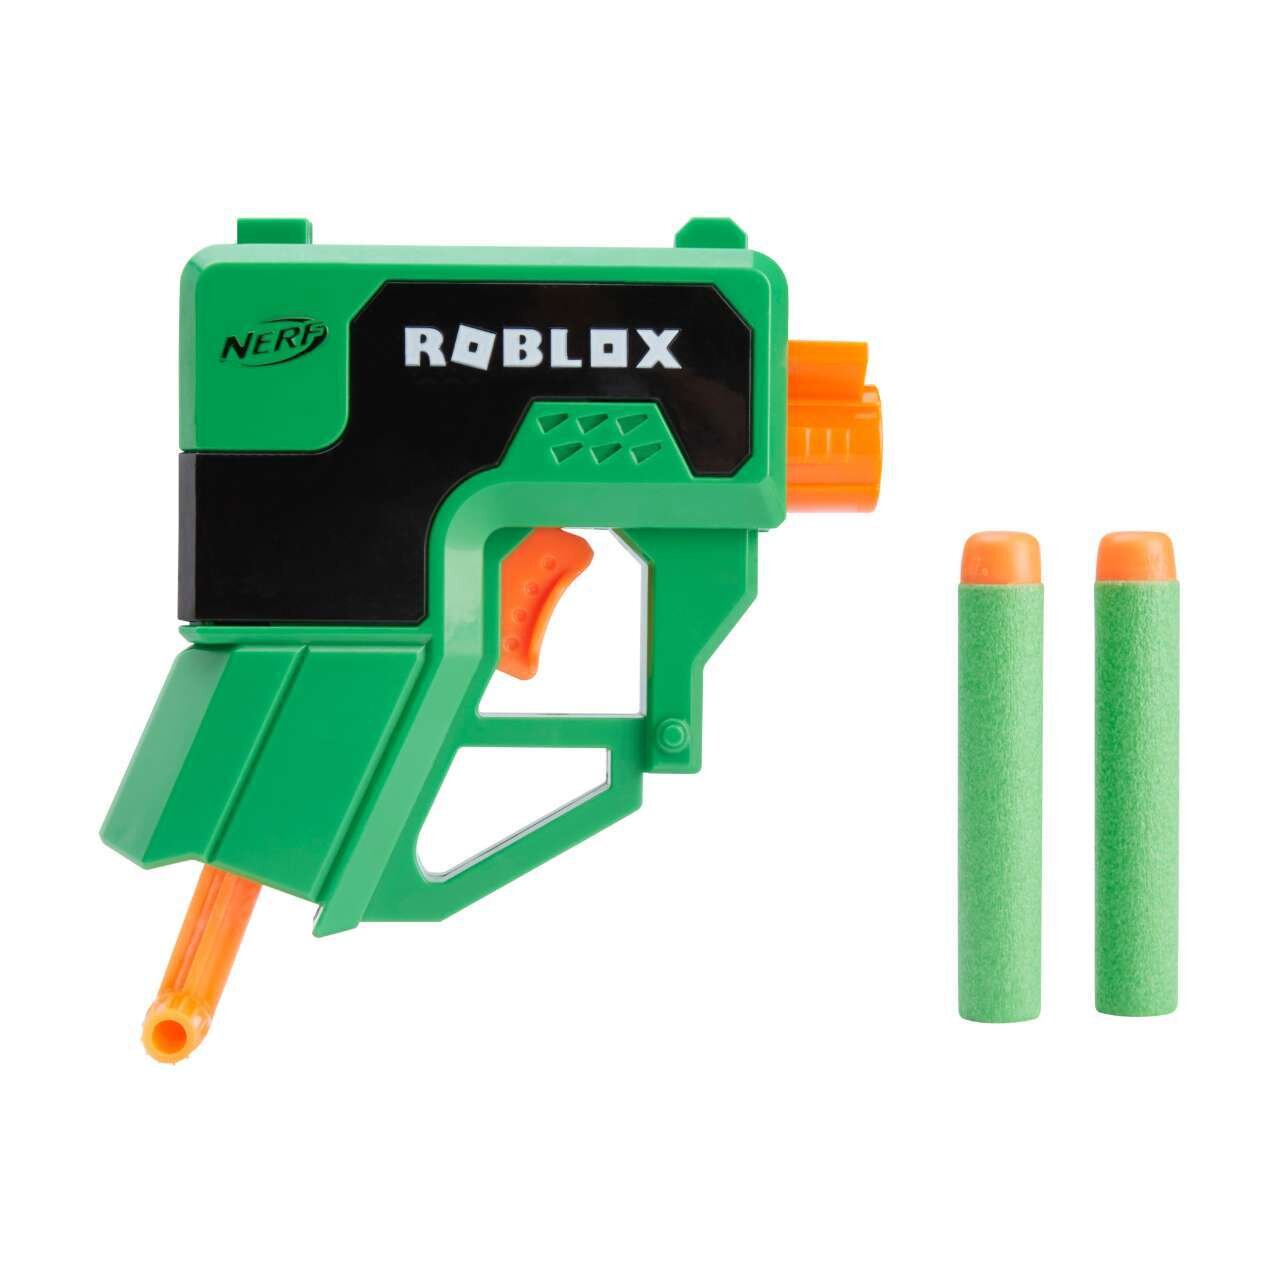 Roblox Partners With Hasbro To Make Nerf Blasters And Monopoly Game Geektyrant - roblox nerf guns